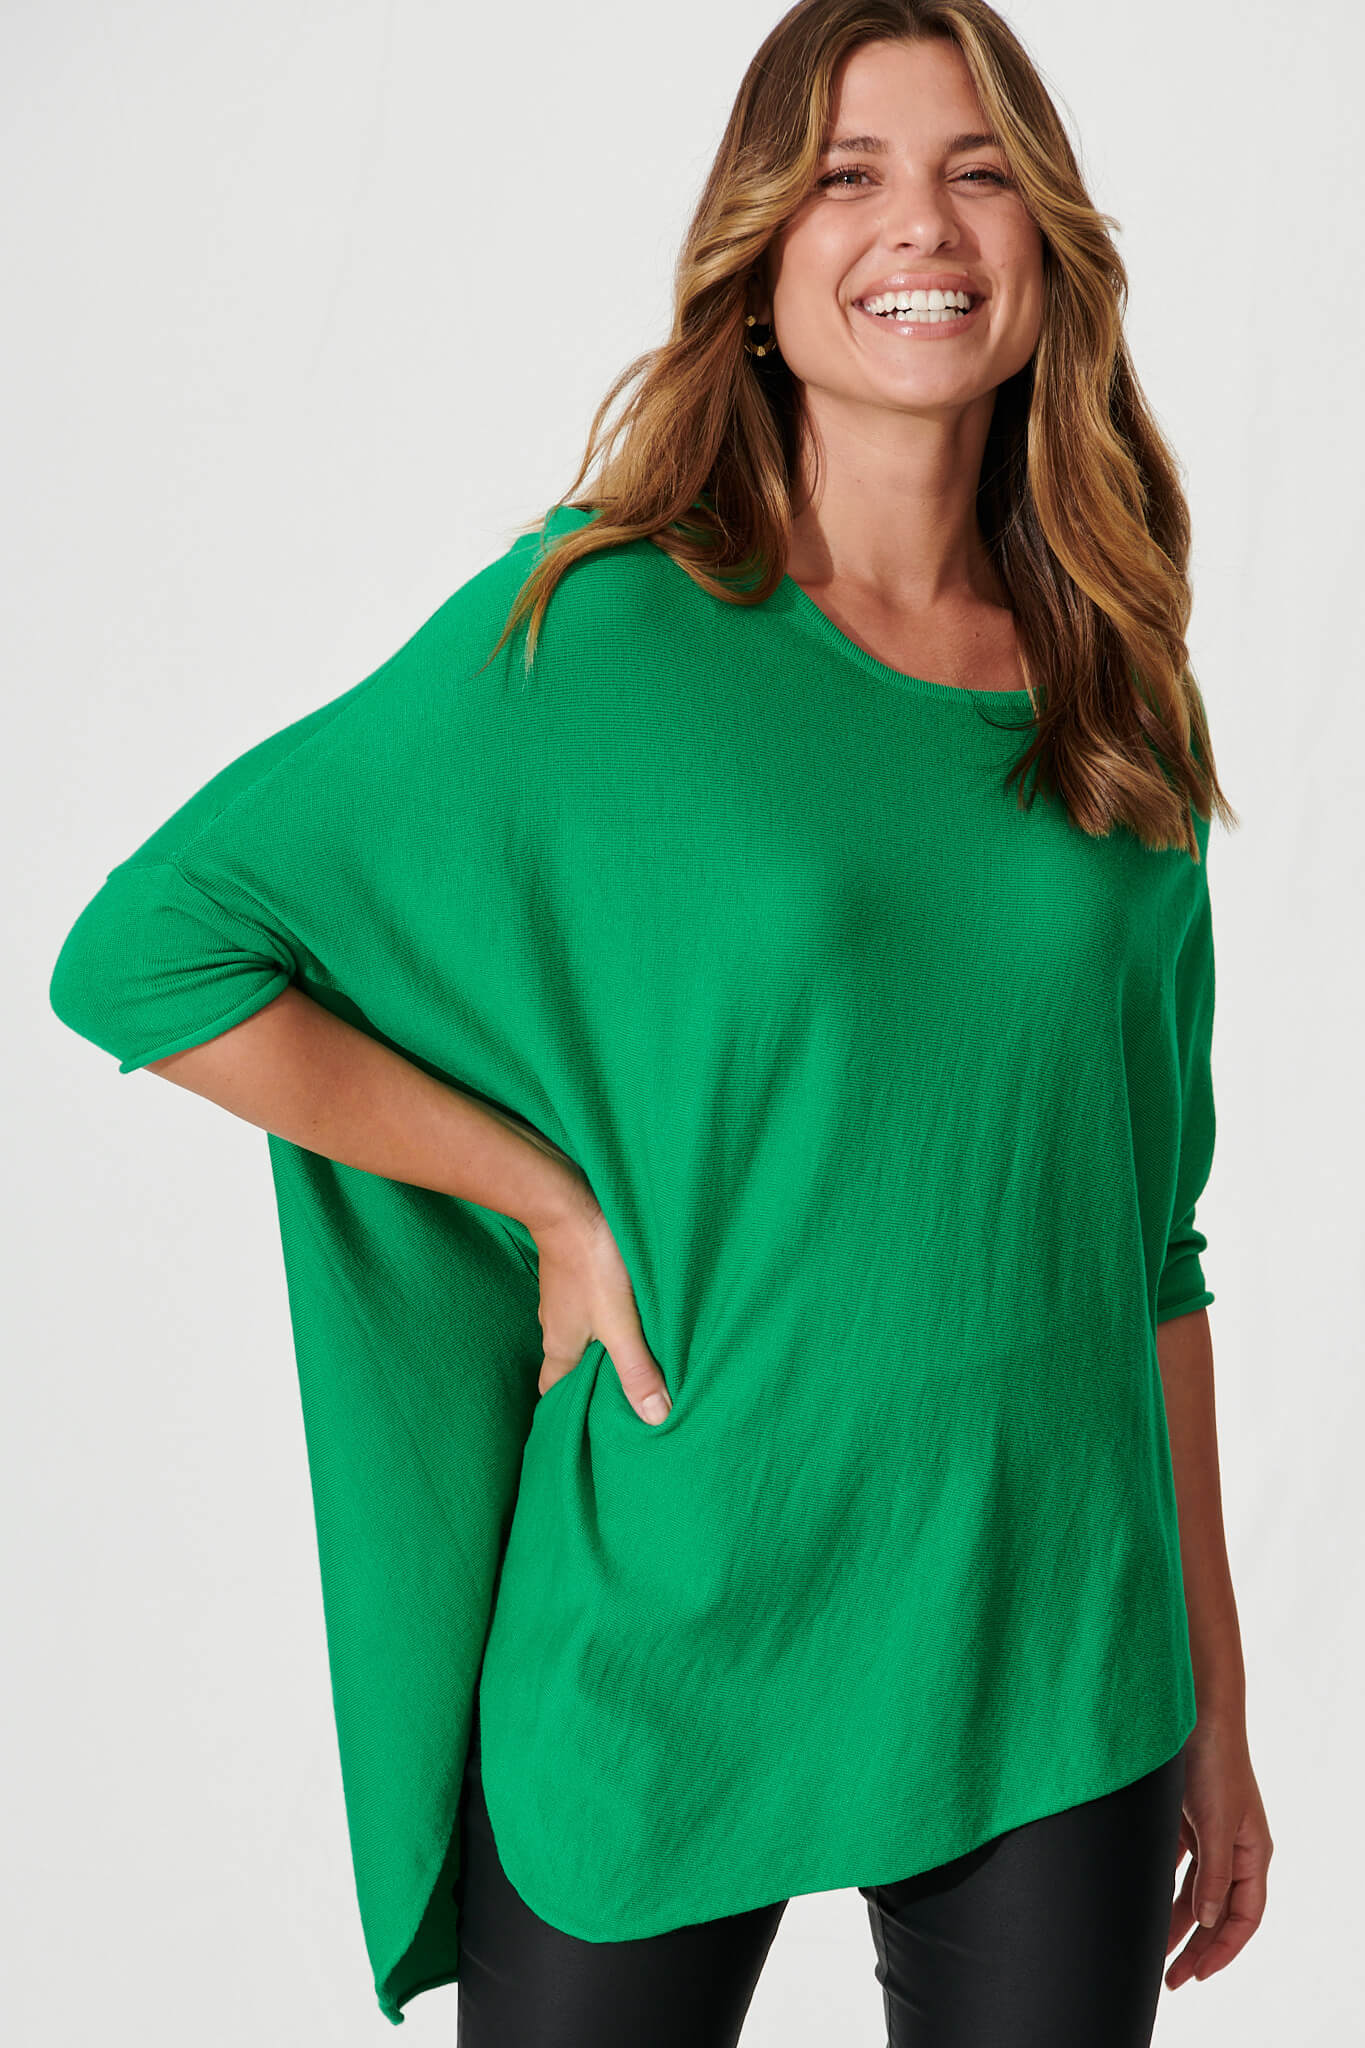 Eye To Eye Knit Top In Green - front